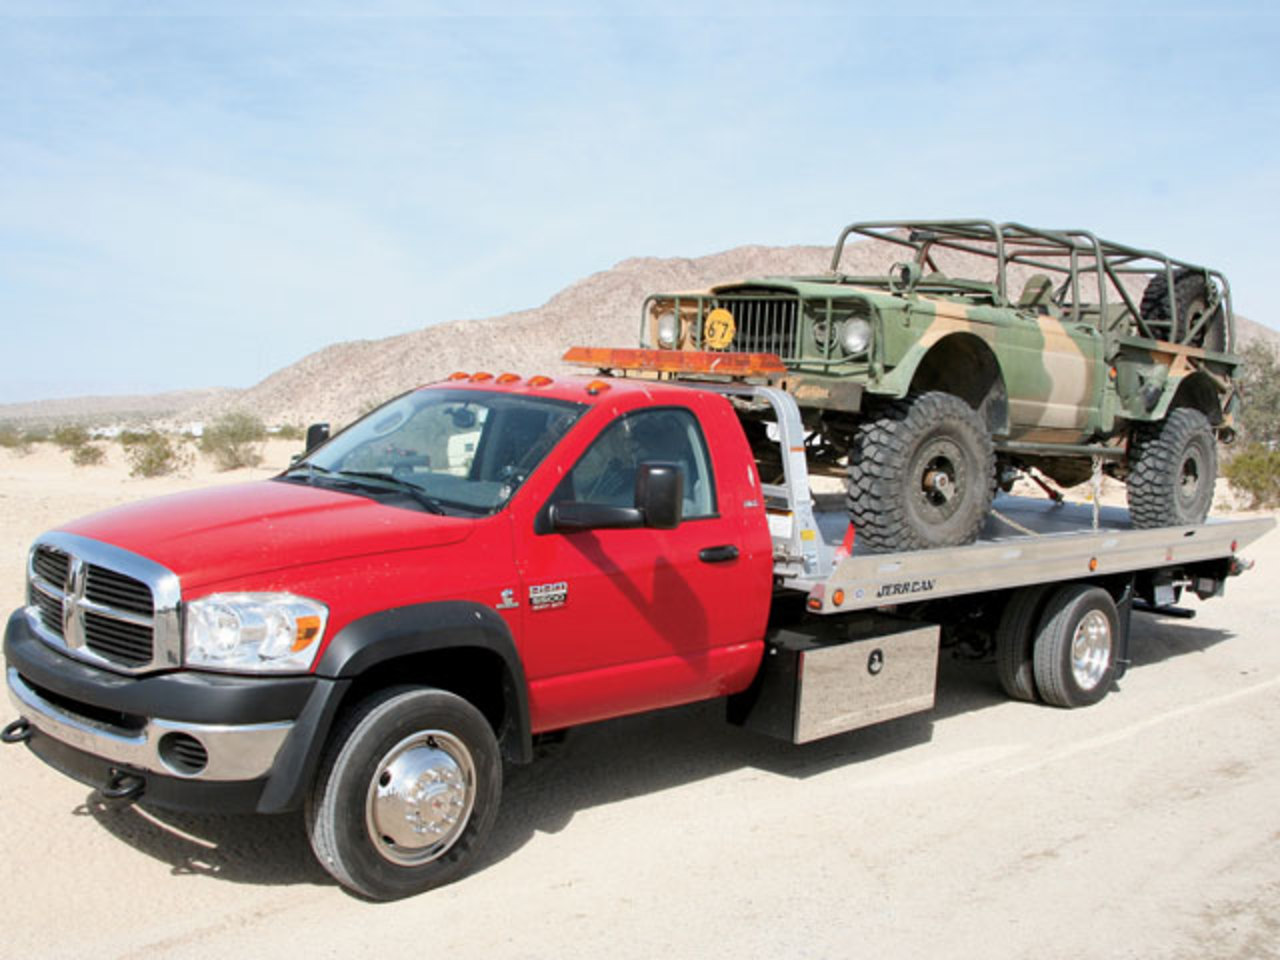 2008 Dodge Ram 5500 Chassis Cab Tow Bed Towing M715 Red Exterior View